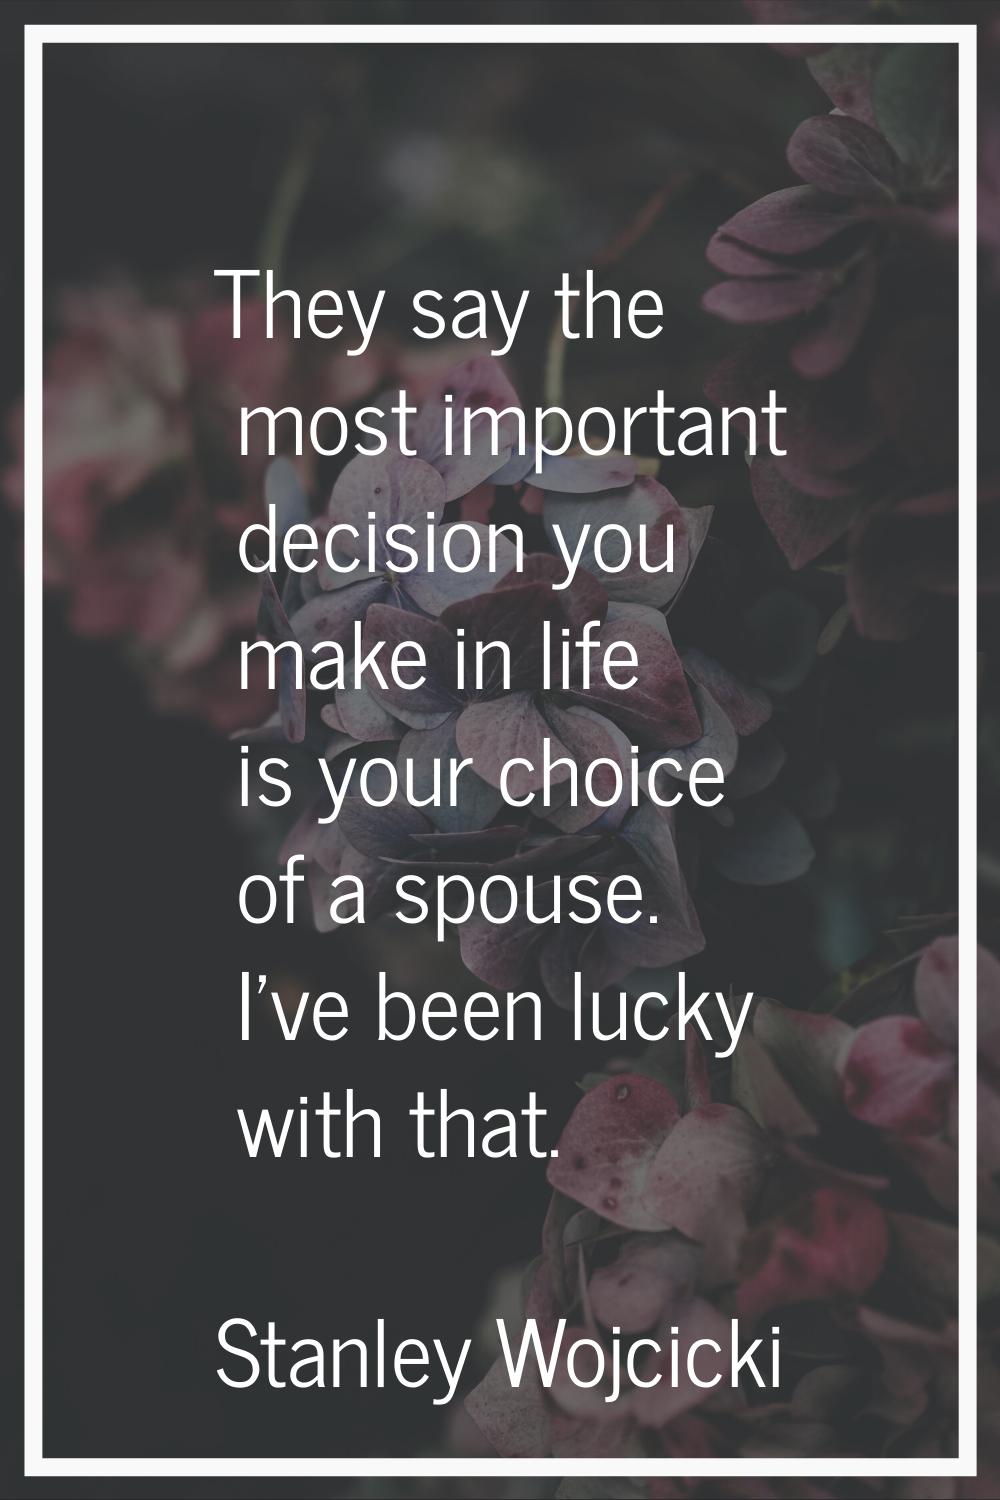 They say the most important decision you make in life is your choice of a spouse. I've been lucky w